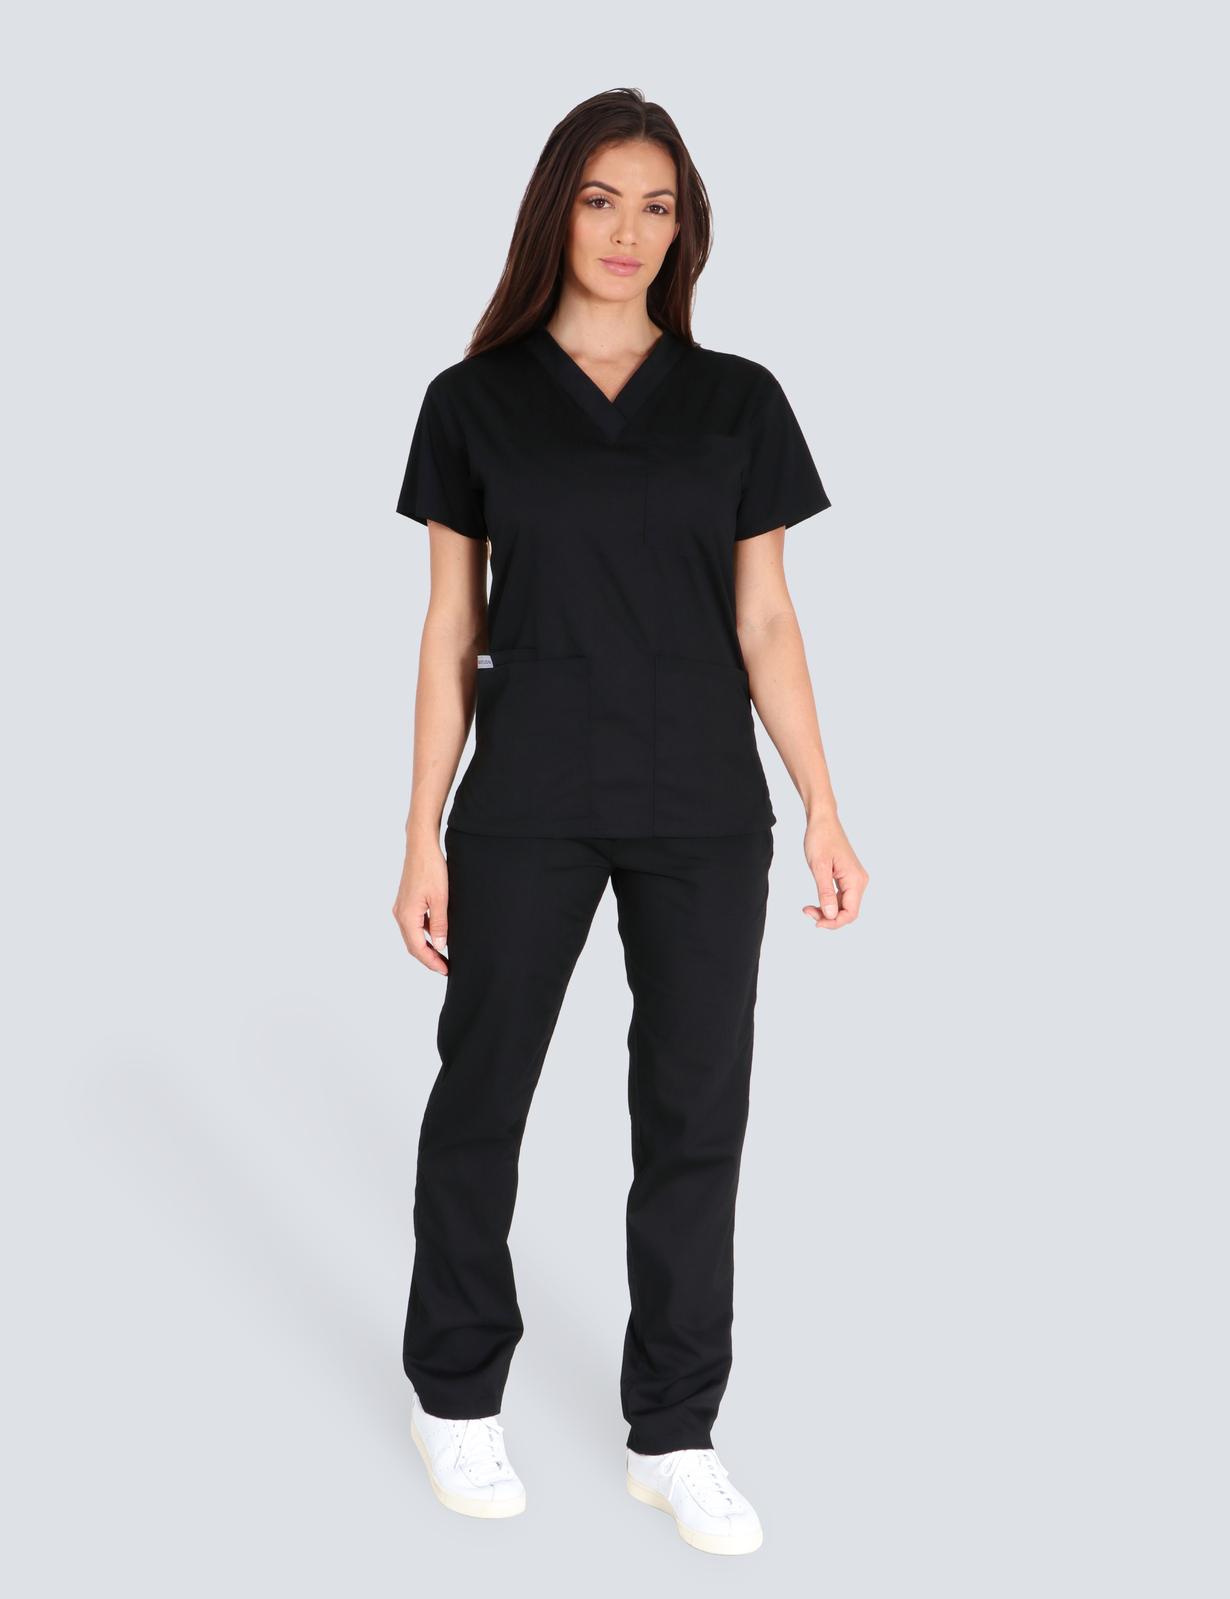 Prince Charles Hospital - Medical Imaging (Women's Fit Solid Top and Cargo  Pants in Black incl Logos)